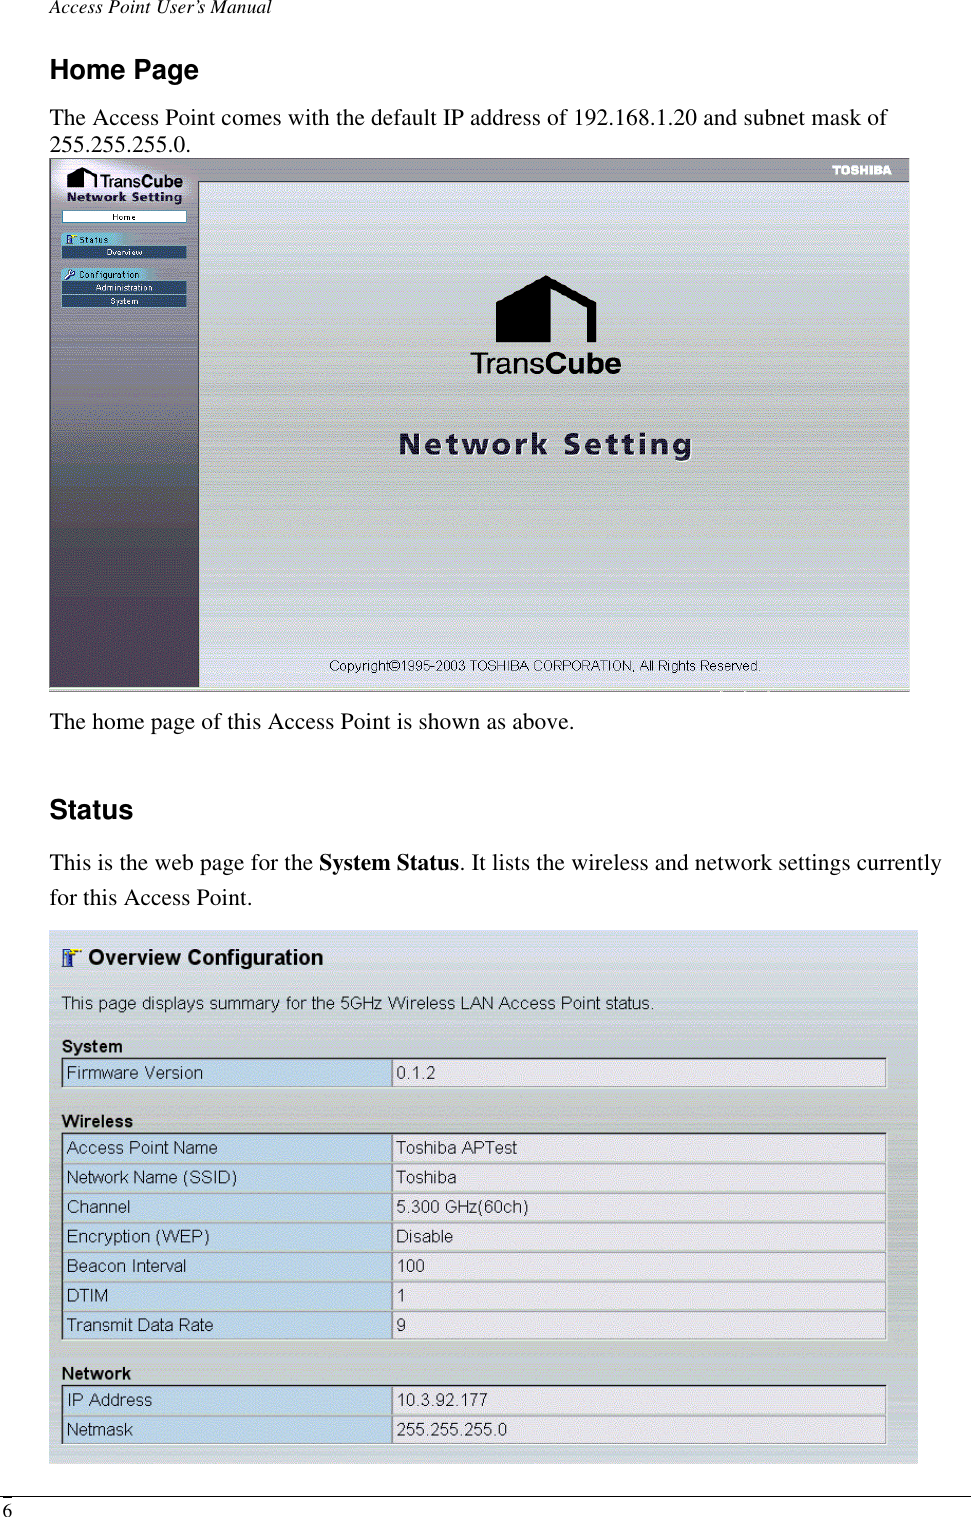 Access Point User’s Manual  6Home Page The Access Point comes with the default IP address of 192.168.1.20 and subnet mask of 255.255.255.0.  The home page of this Access Point is shown as above. Status This is the web page for the System Status. It lists the wireless and network settings currently for this Access Point.    